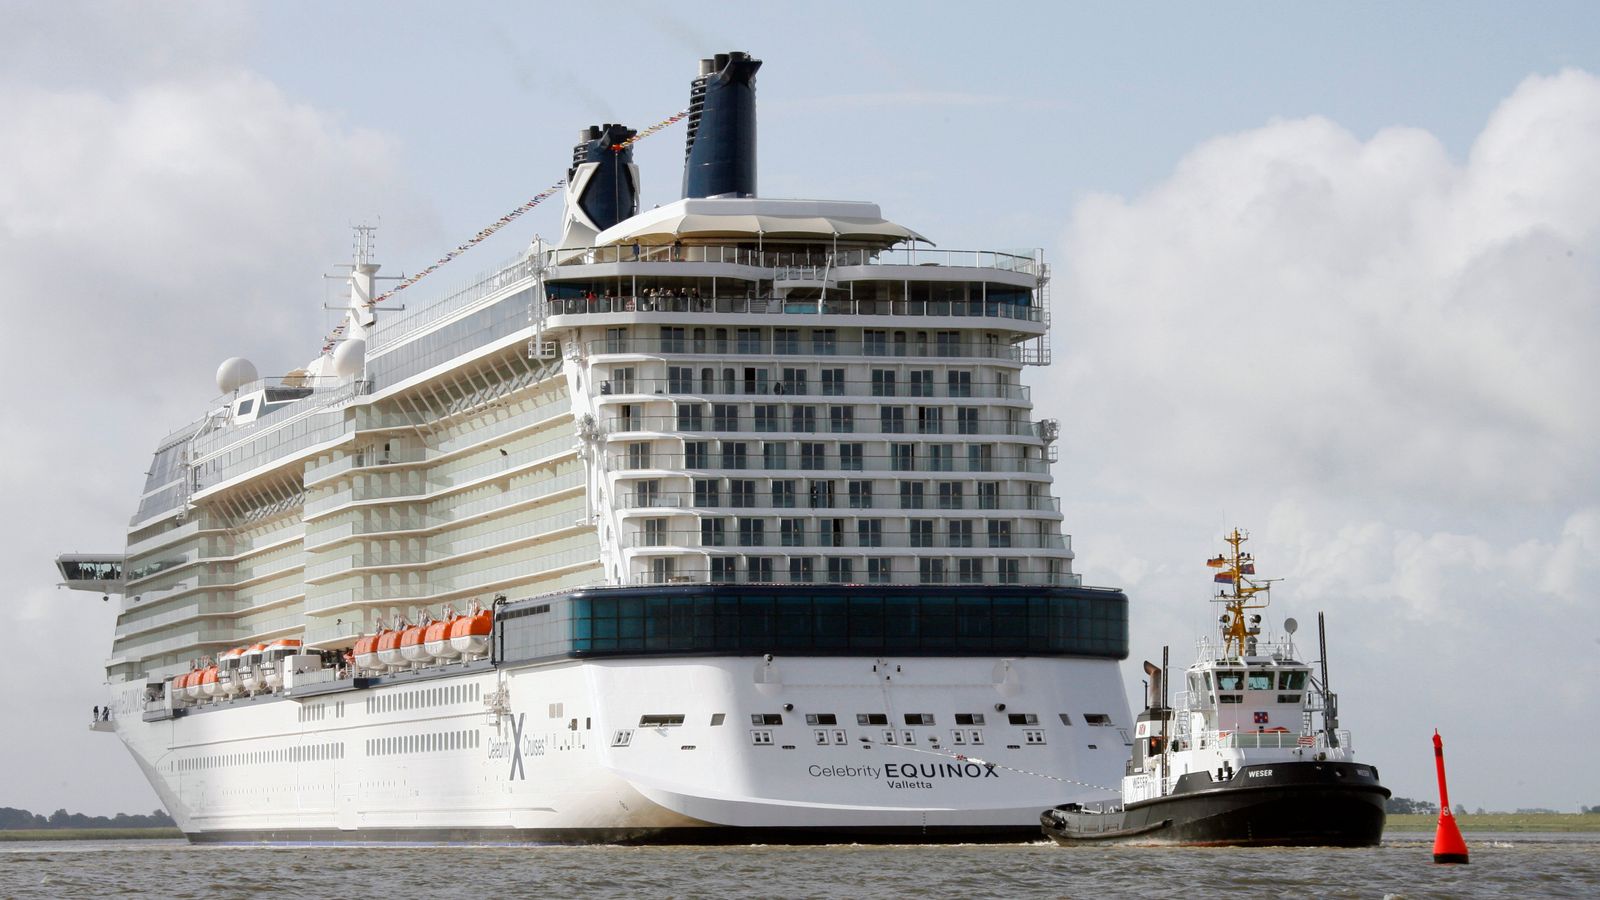 Cruise ship passenger's body was kept in drinks cooler for almost a week, lawsuit claims